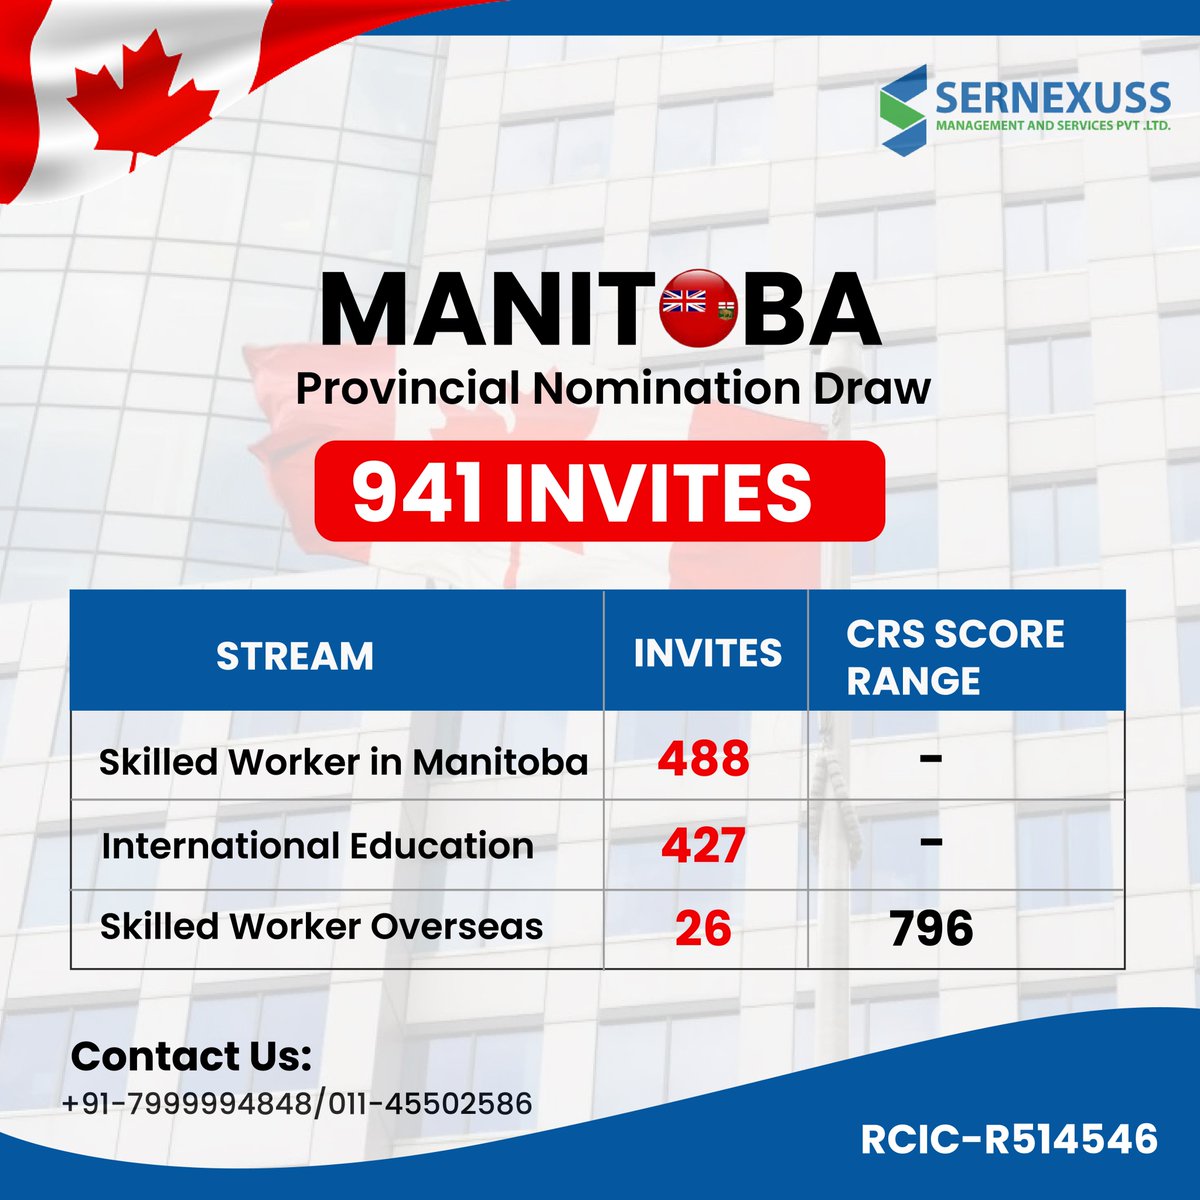 The latest MPNP draw sent out 941 PR invitations. For more information call us at +91 7999994848 or drop an email to us at info@sernexuss.com You can also chat with our experts: bit.ly/3YFARfD #manitoba #pnp #manitobapnp #pnpprogram #sernexuss #sernexussimmigration